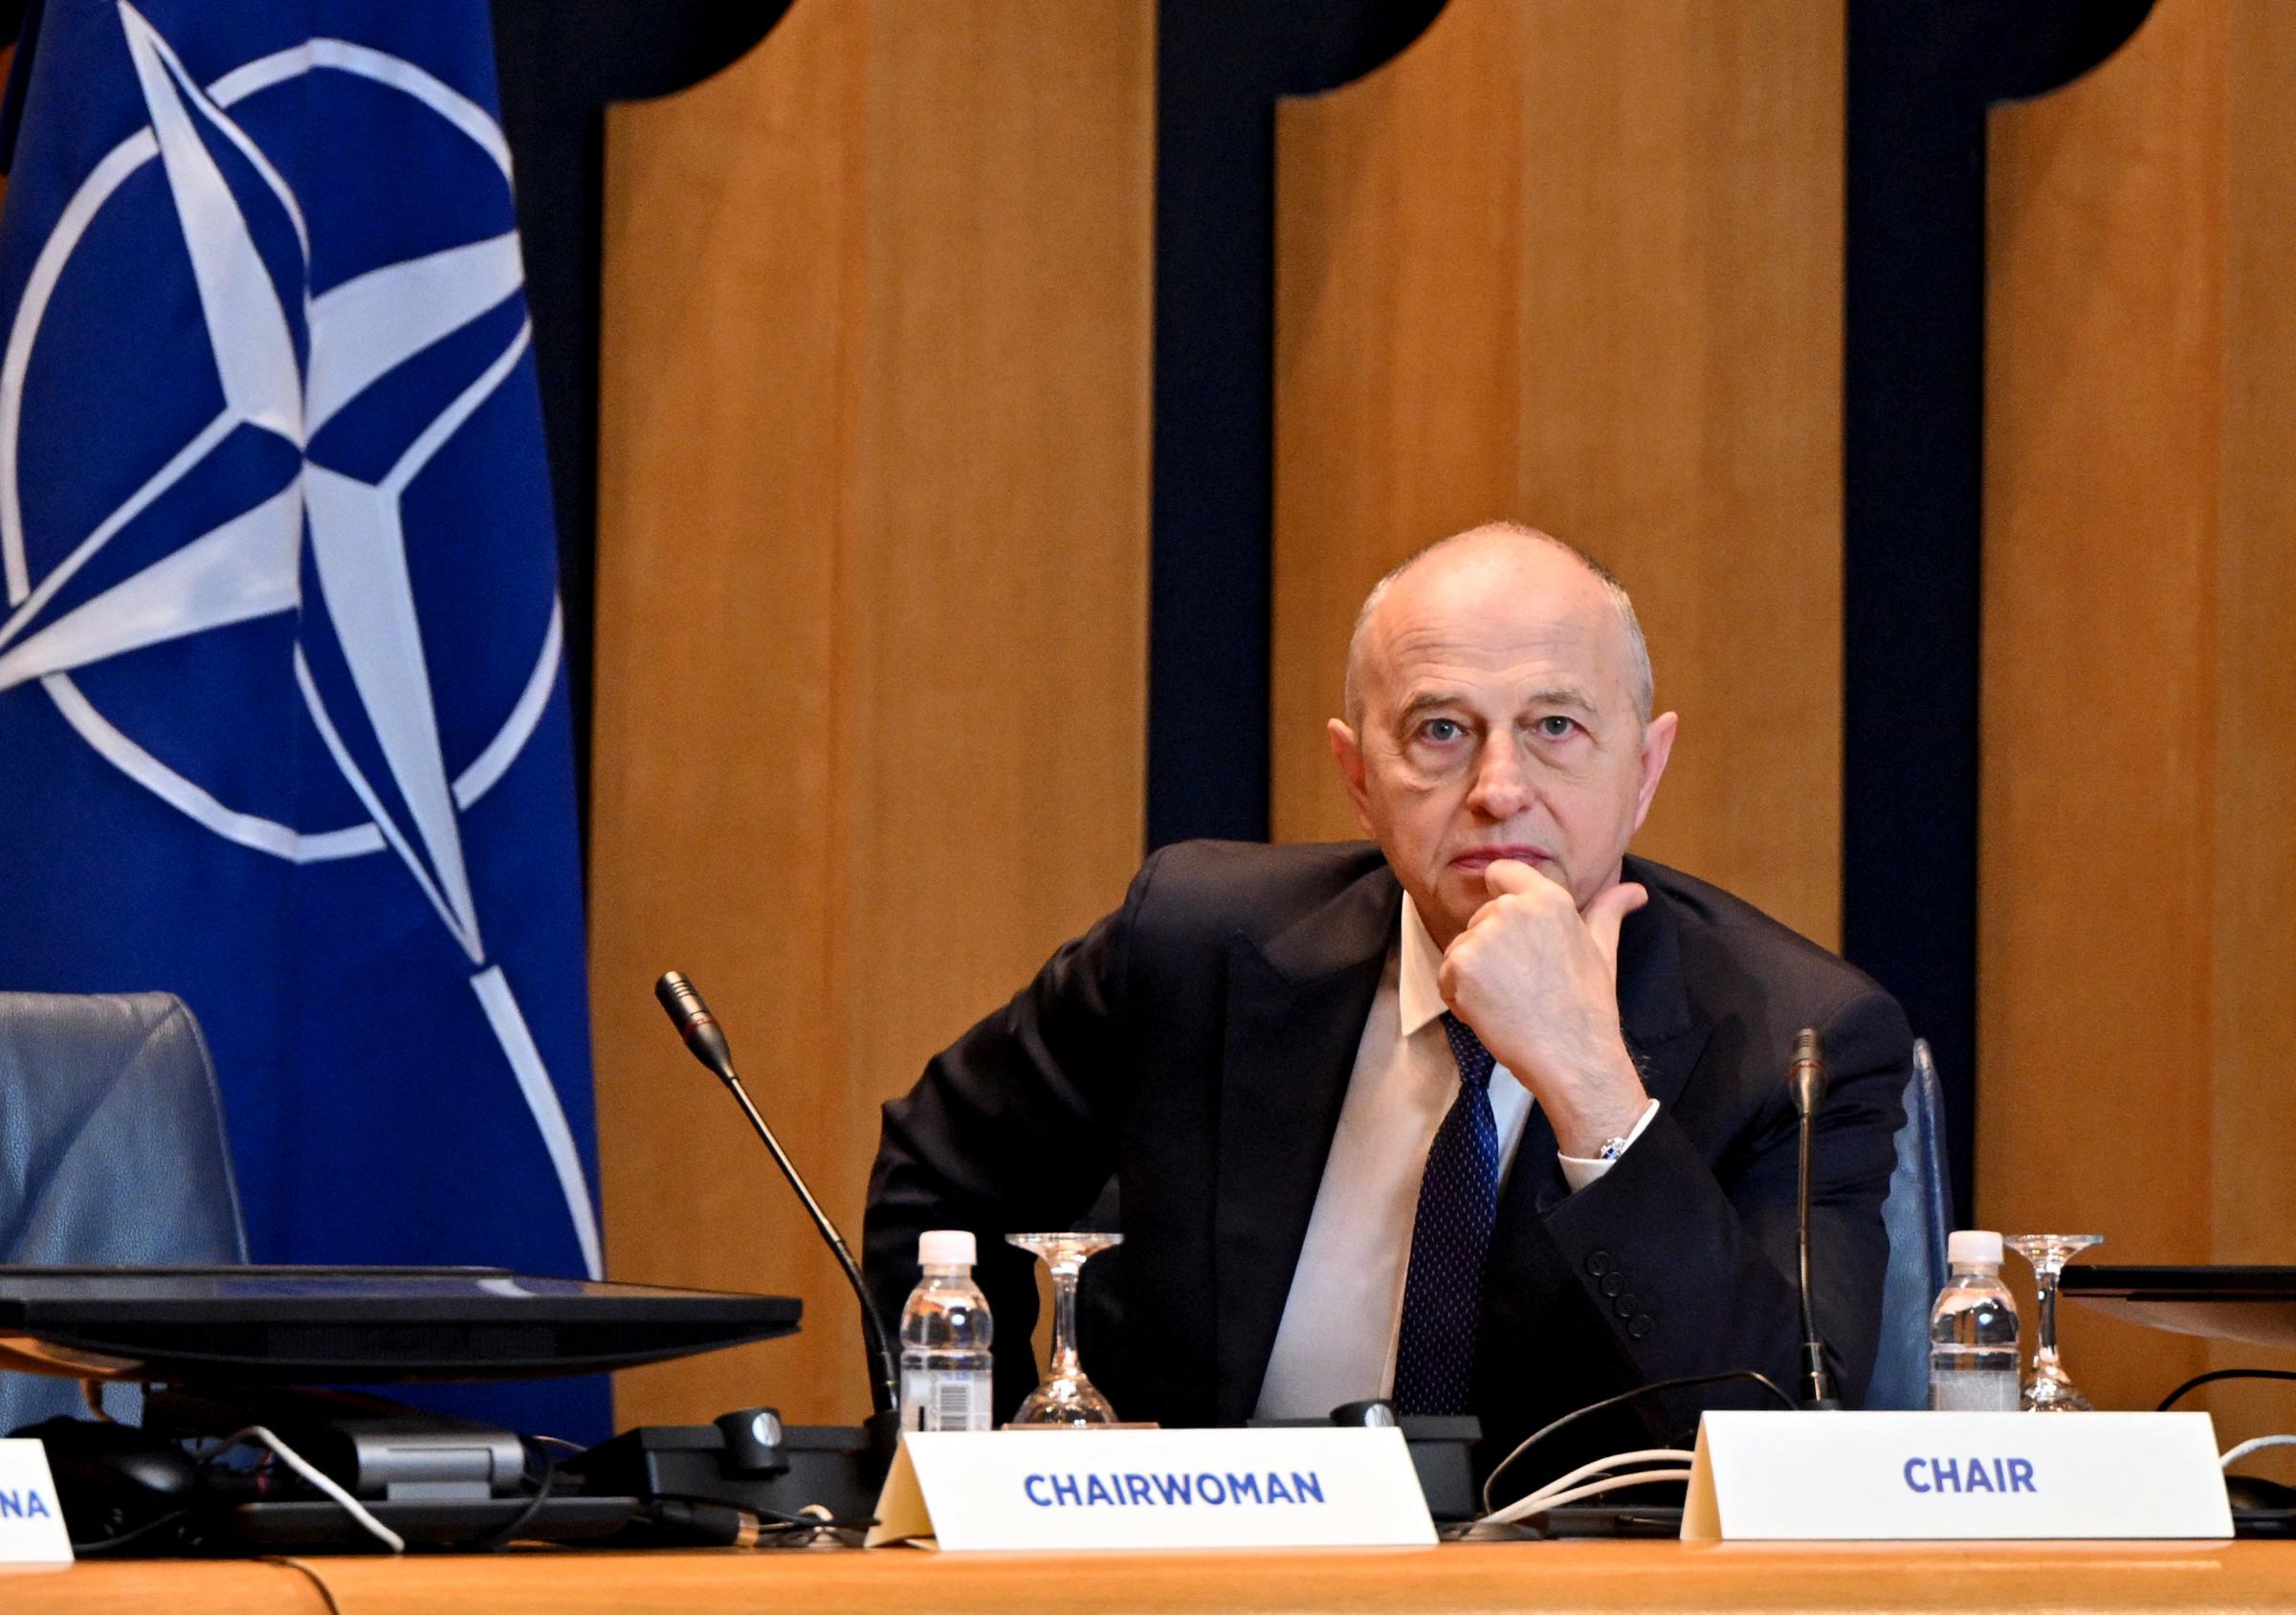 NATO Deputy Secretary General, Mircea Geoana, chairs a session of North Atlantic Council (NAC) with Council of Ministers of Bosnia and Herzegovina, in Sarajevo, on February 1, 2024. (Photo by Elvis BARUKCIC / AFP) (Photo by ELVIS BARUKCIC/AFP via Getty